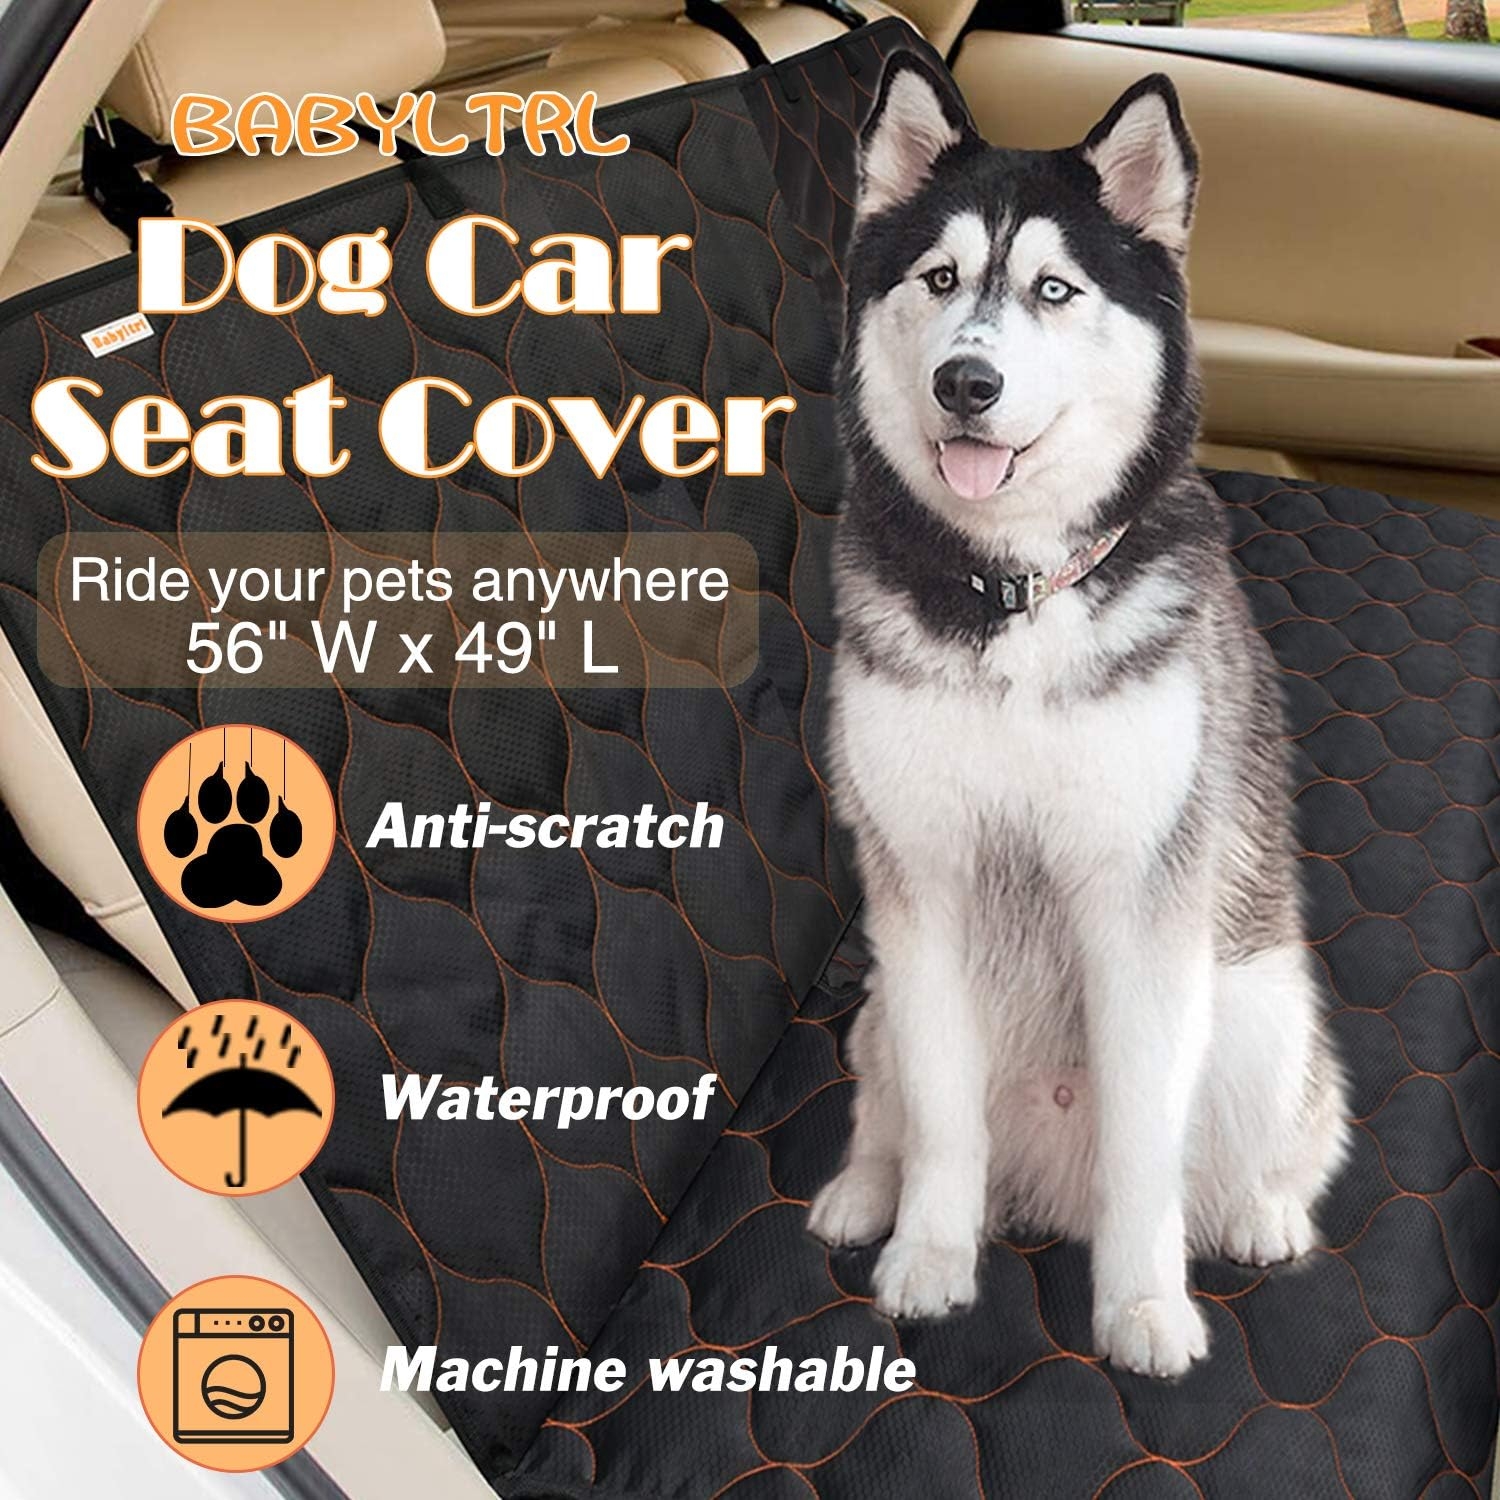 BABYLTRLL Dog Car Seat Cover Waterproof Pet Bench Seat Cover Nonslip and Heavy Duty Pet Car Seat Cover for Dogs with Universal Size Fits Cars, Trucks and SUVs (56" W x 49" L, Black)